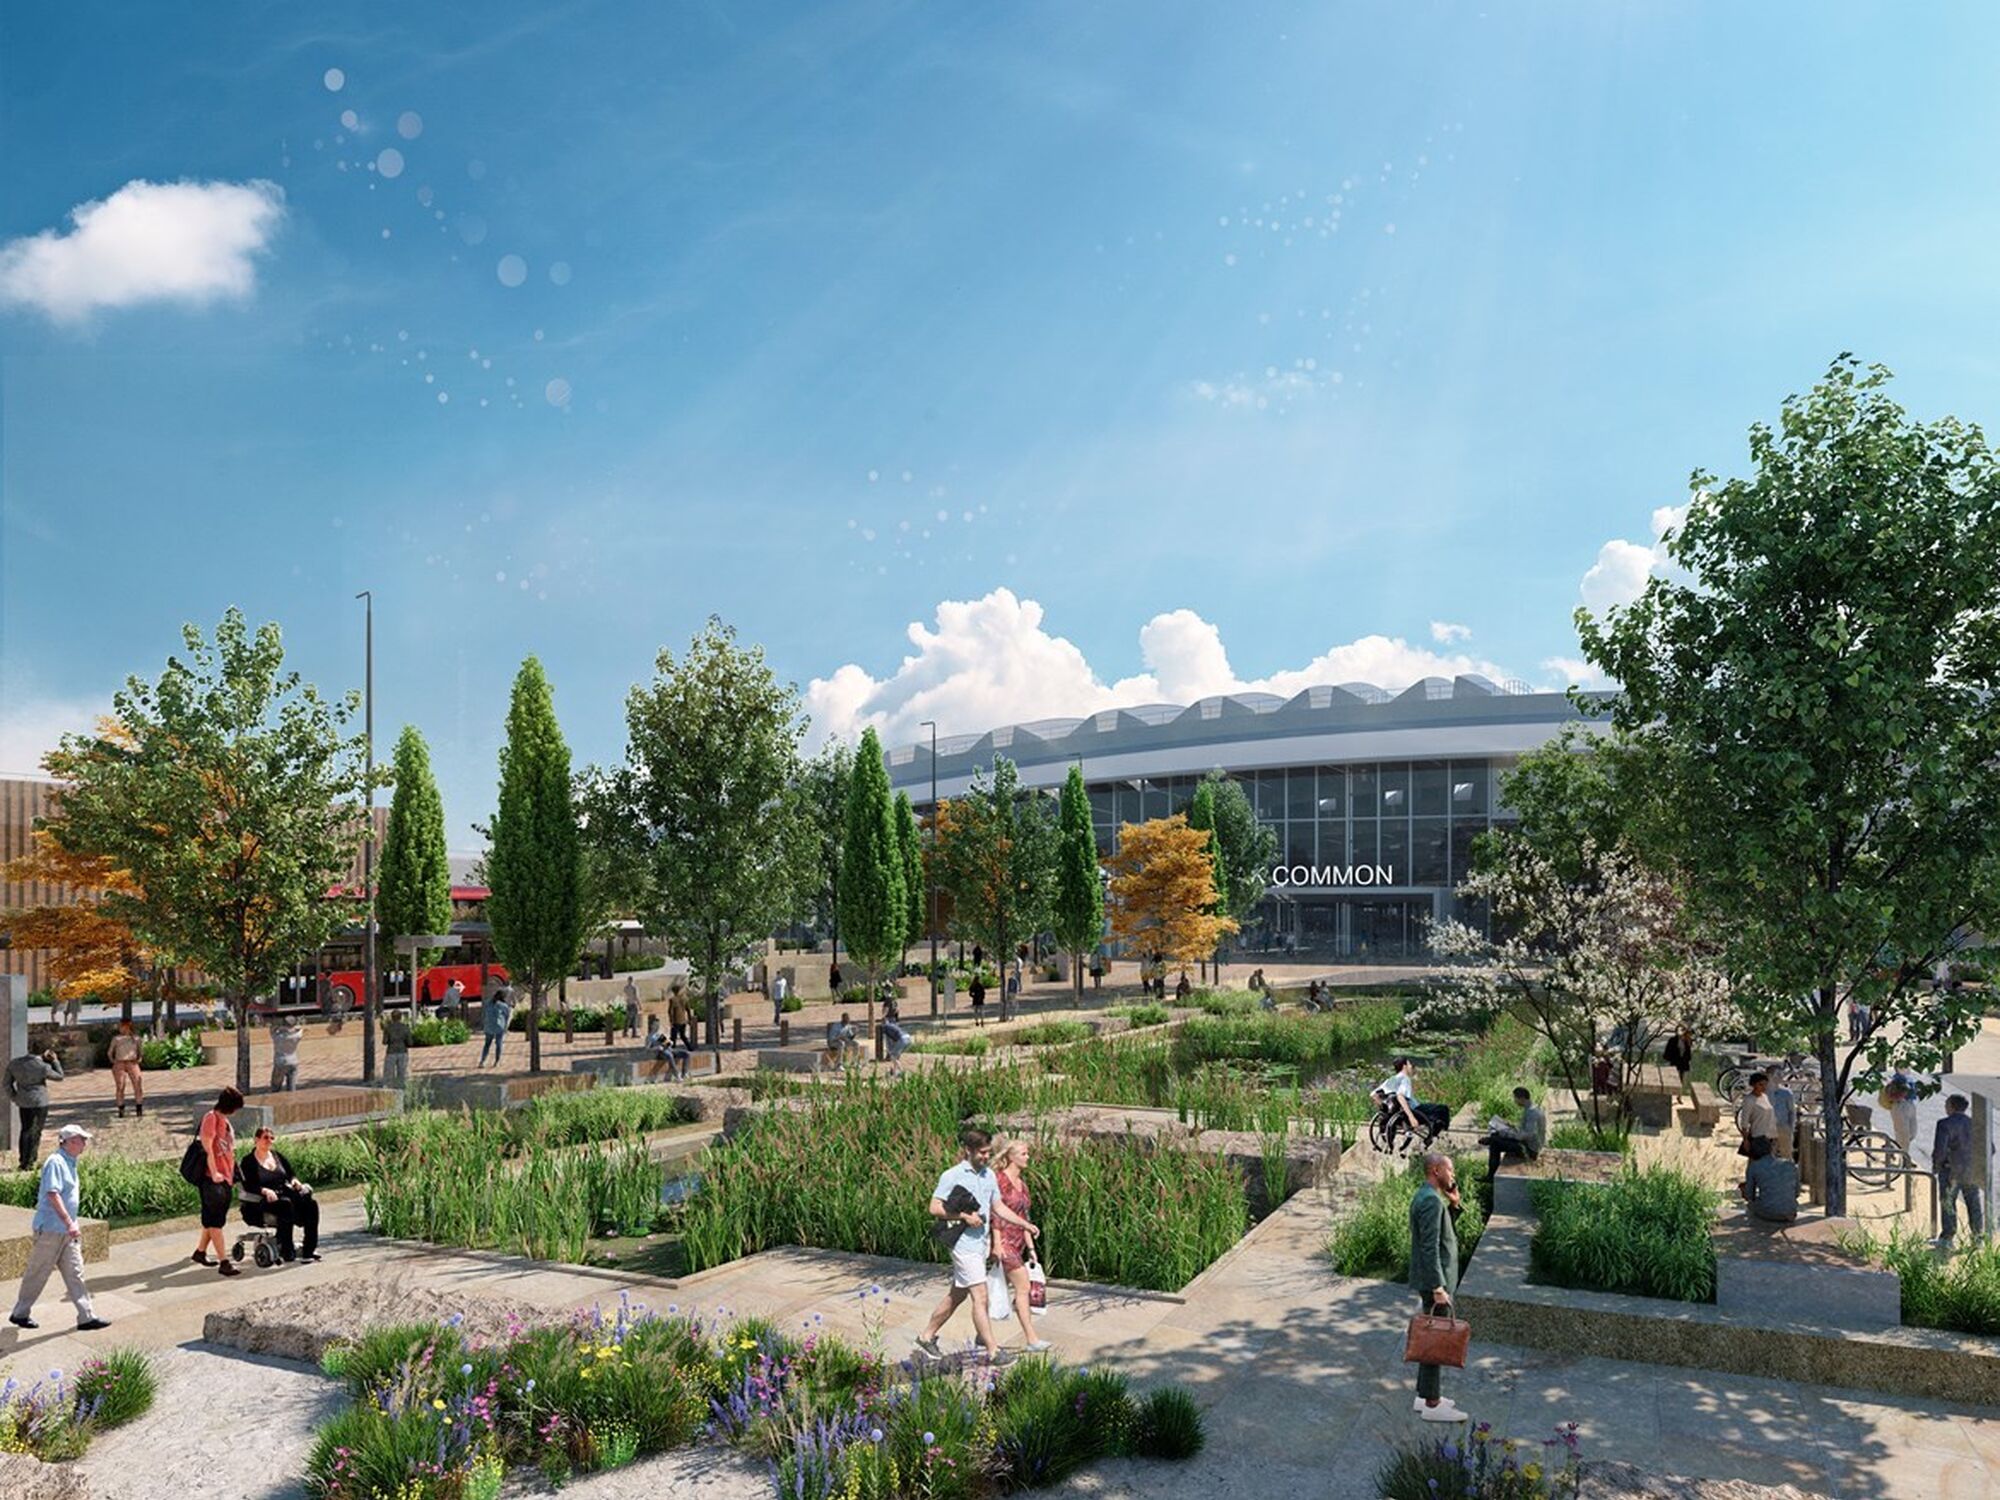 Public space designs revealed for HS2’s new Old Oak Common station